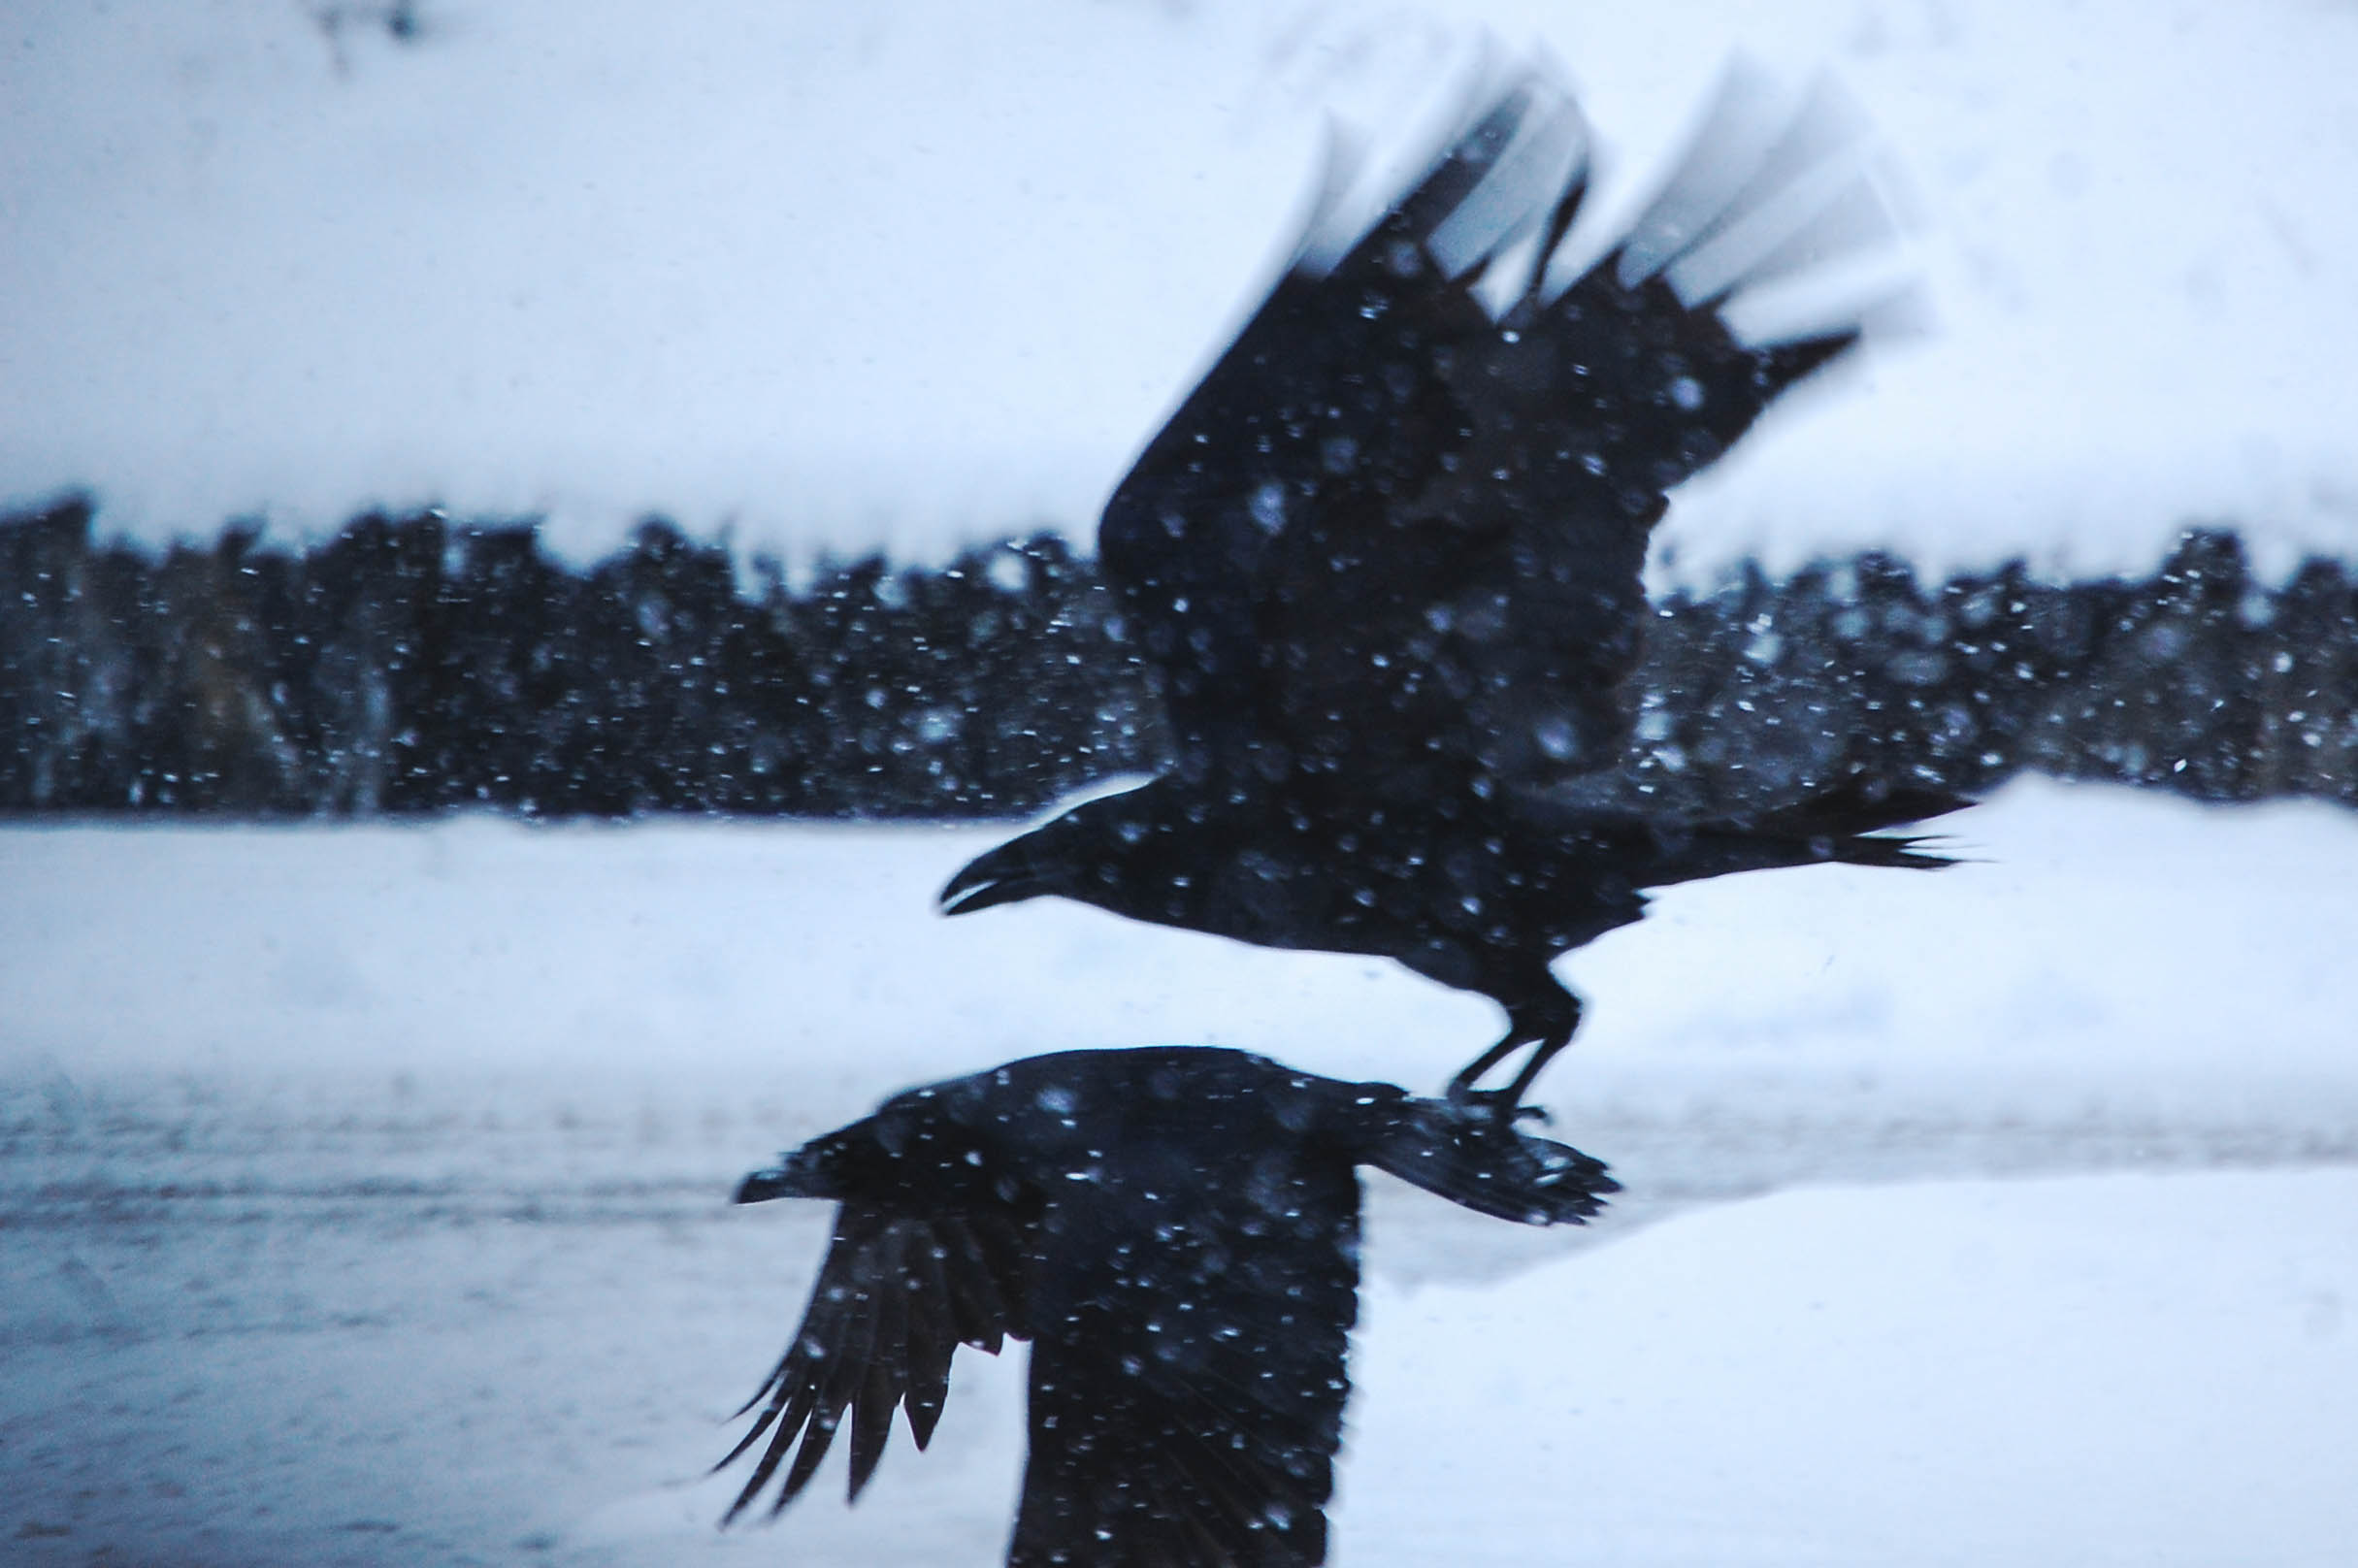  Ravens in a snowstorm, Sitka 2015 